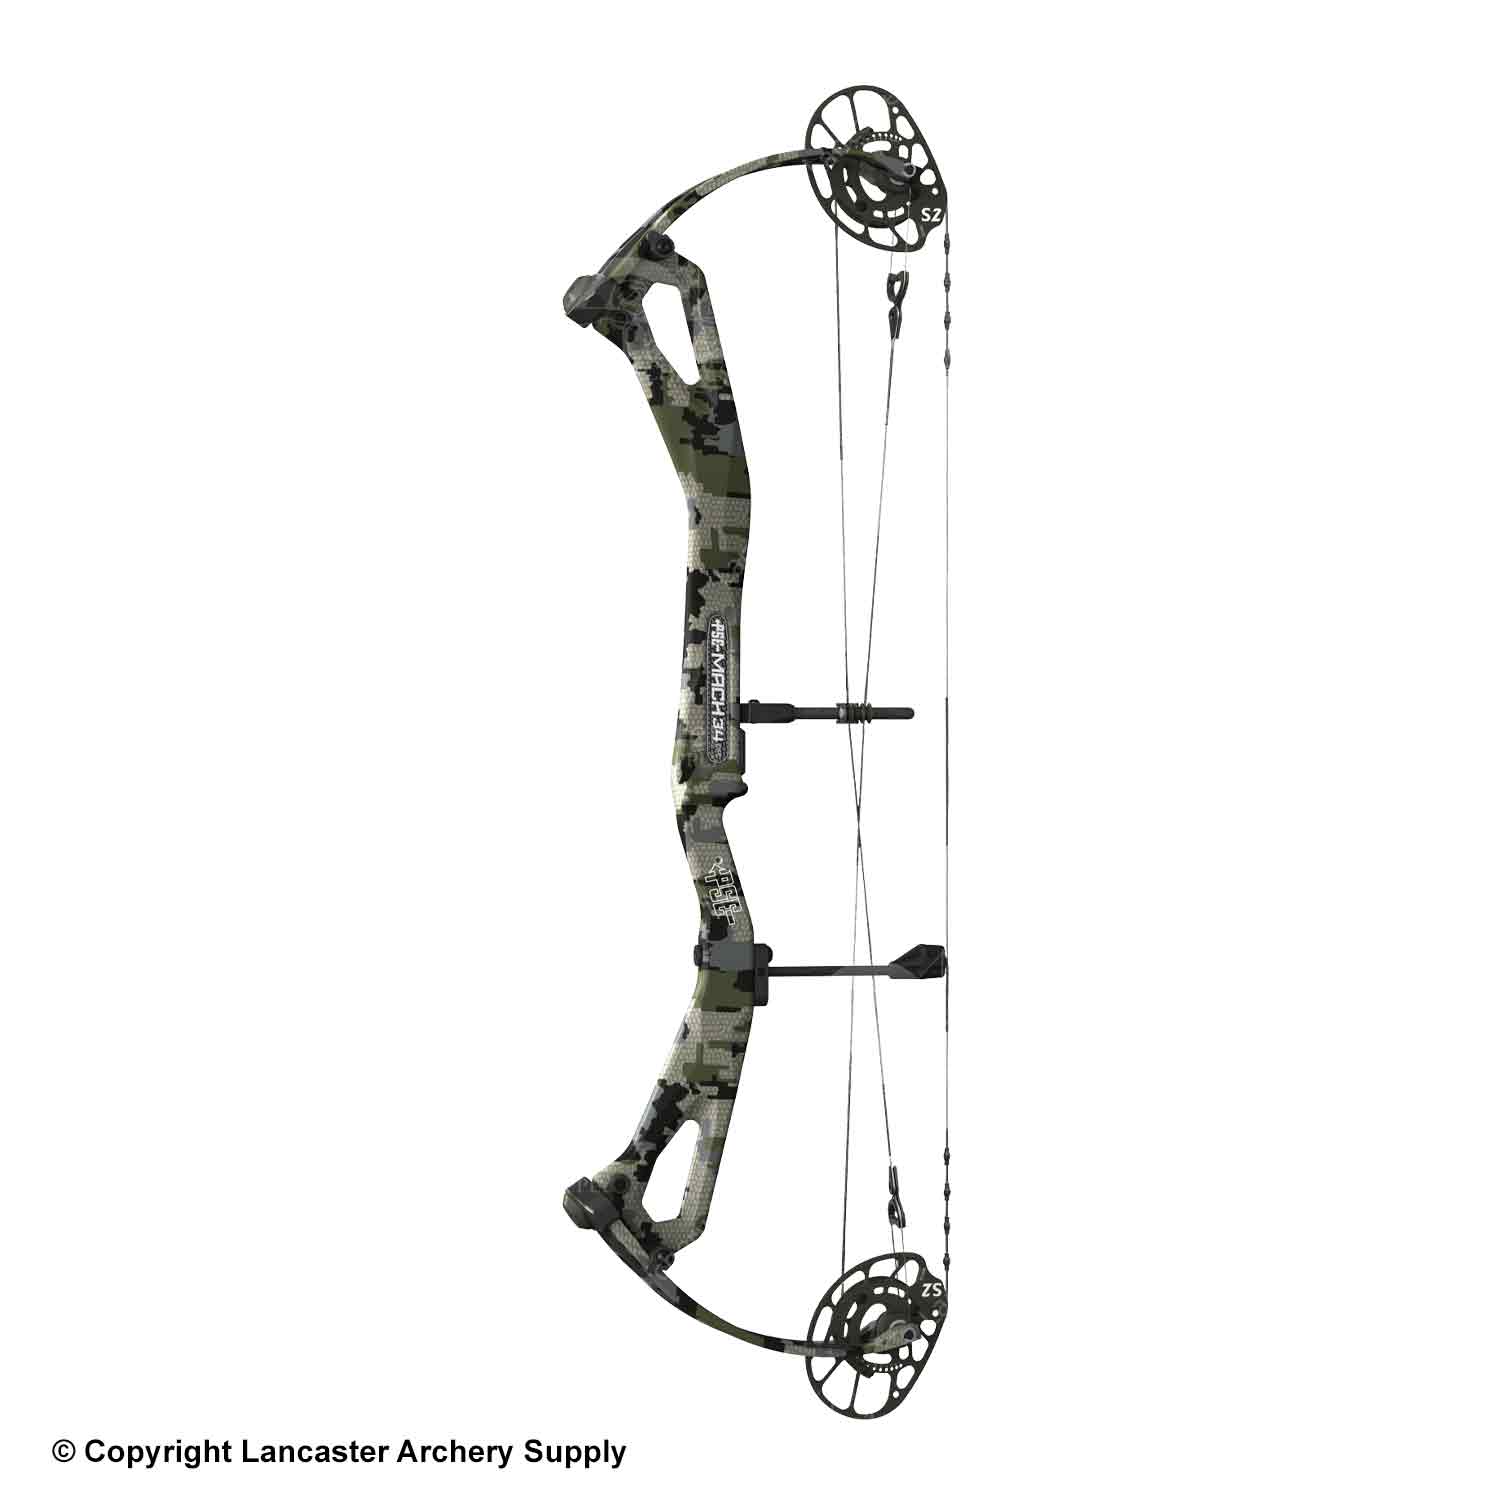 PSE Mach 34 Carbon Compound Hunting Bow (S2)